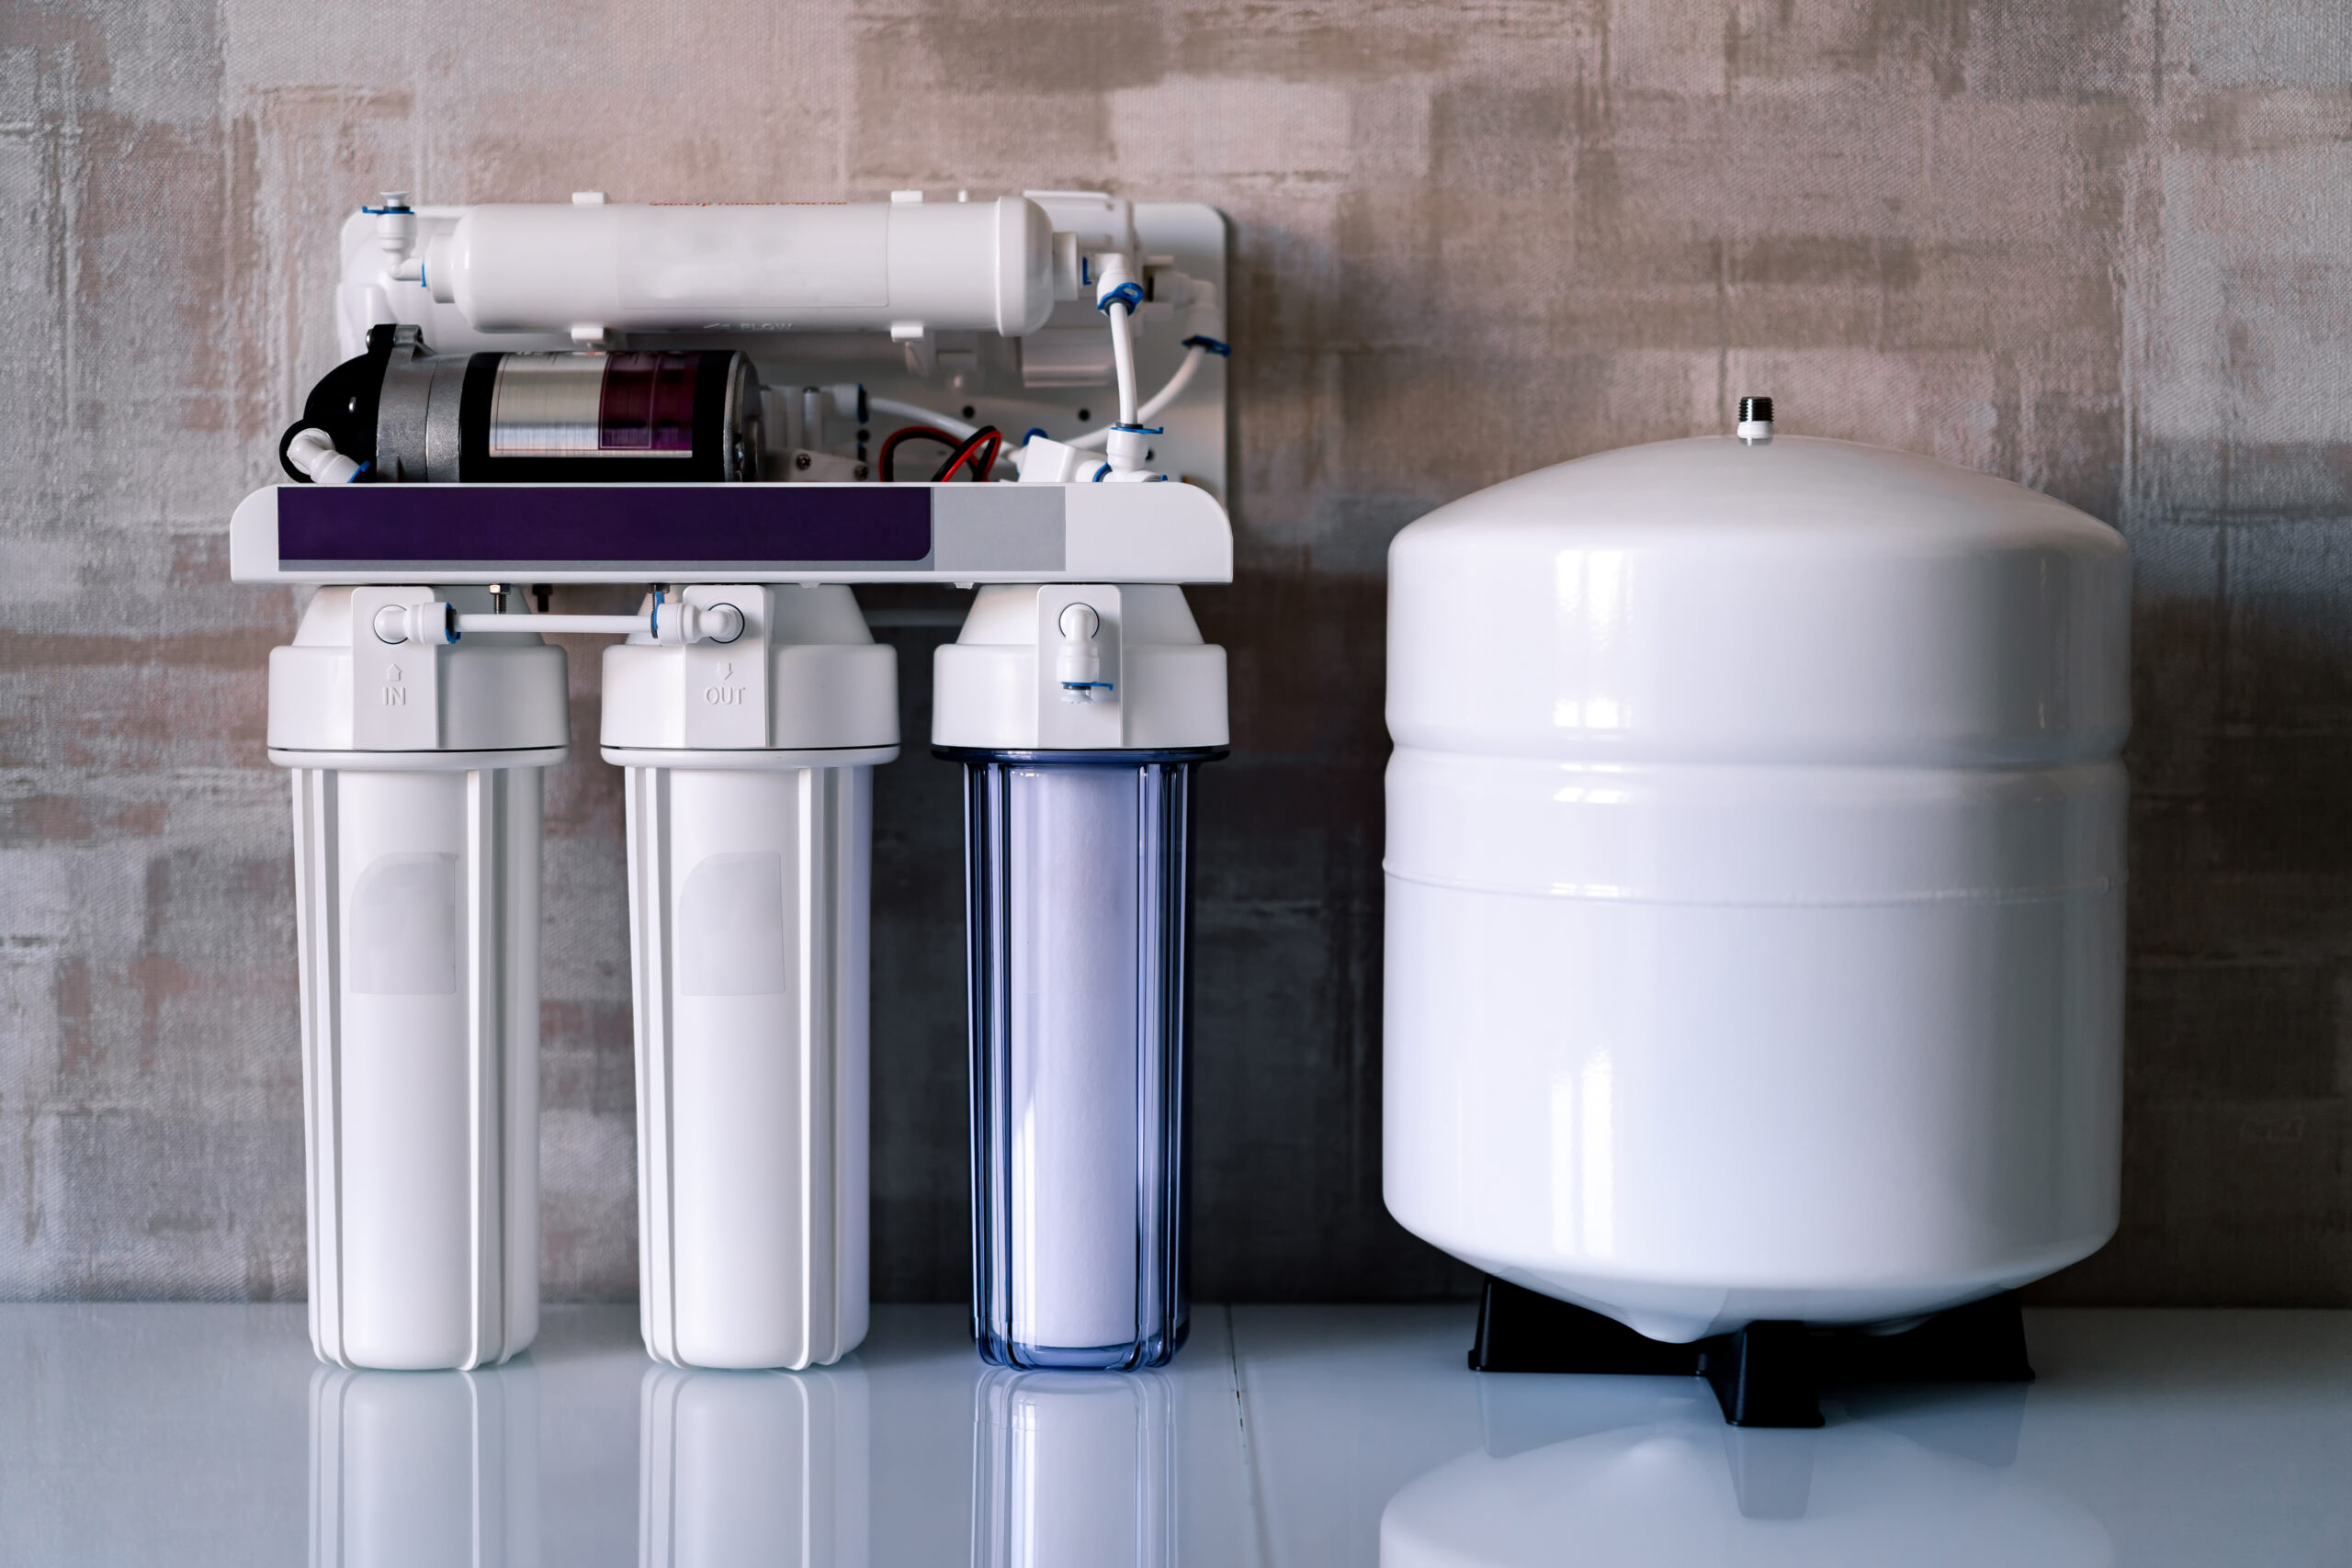 Do I Need A Water Softener If I Have A Reverse Osmosis System?